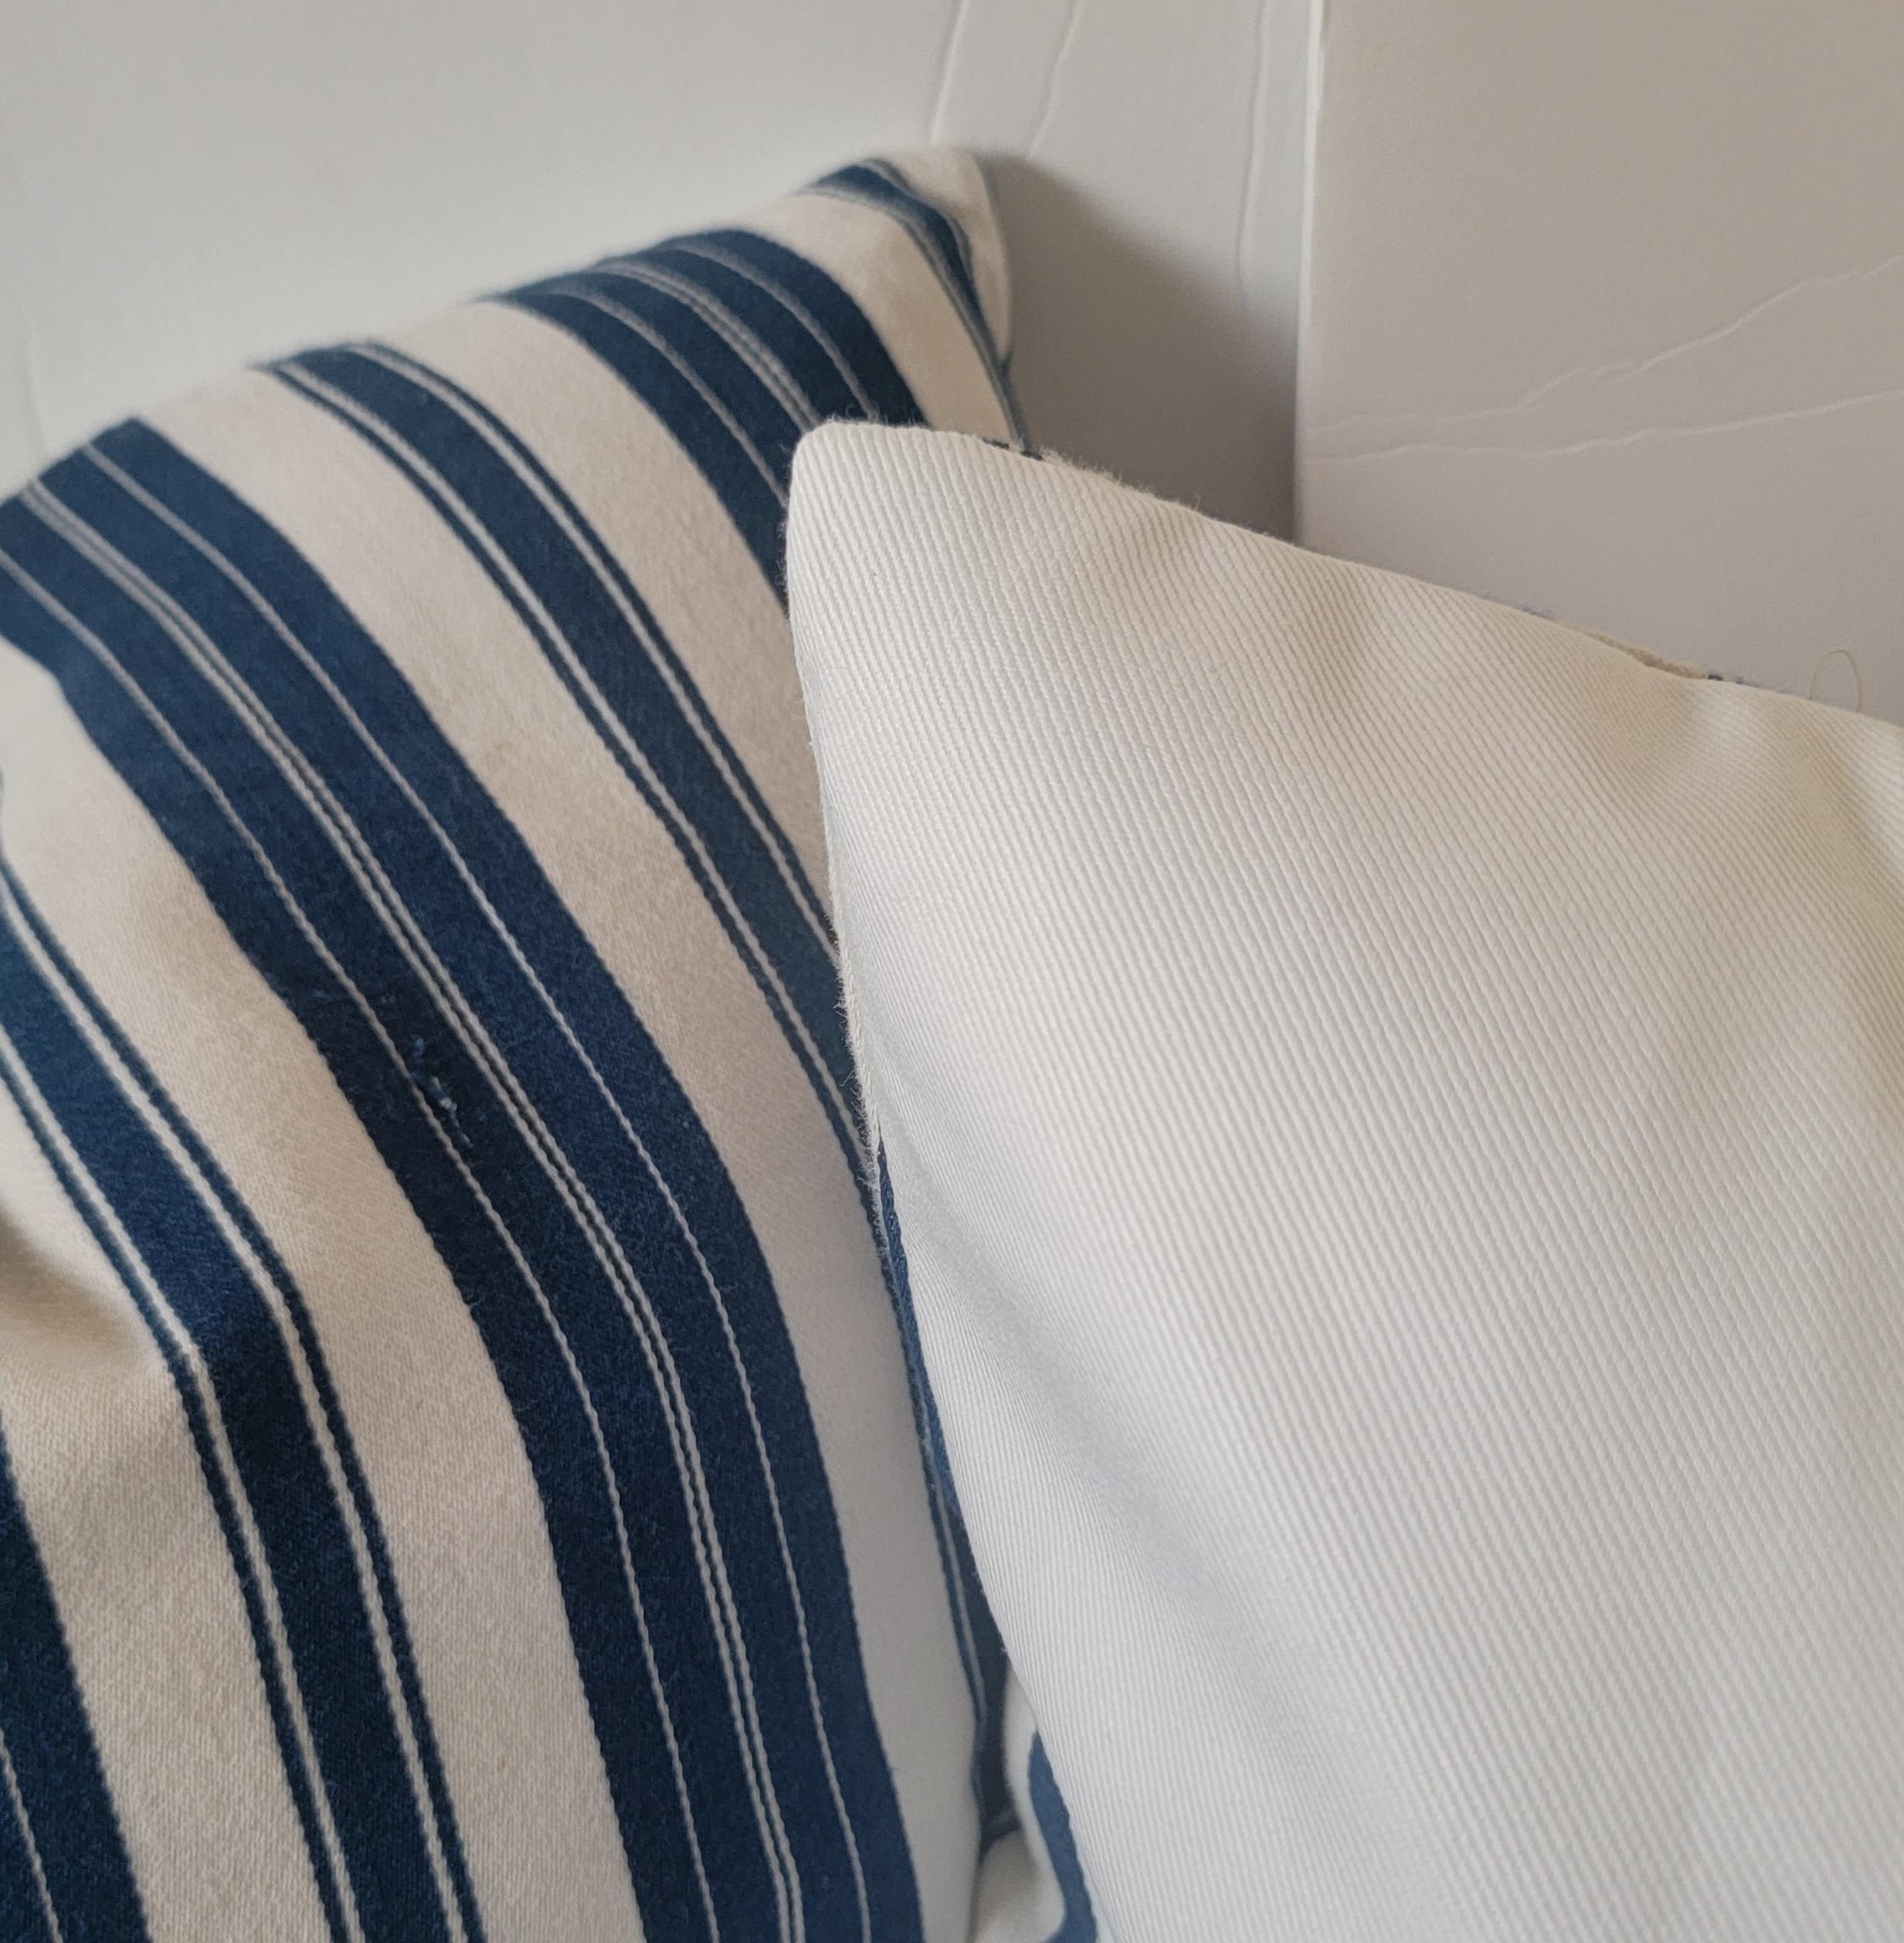 19thc Blue and White Striped Ticking Pillows In Good Condition For Sale In Los Angeles, CA